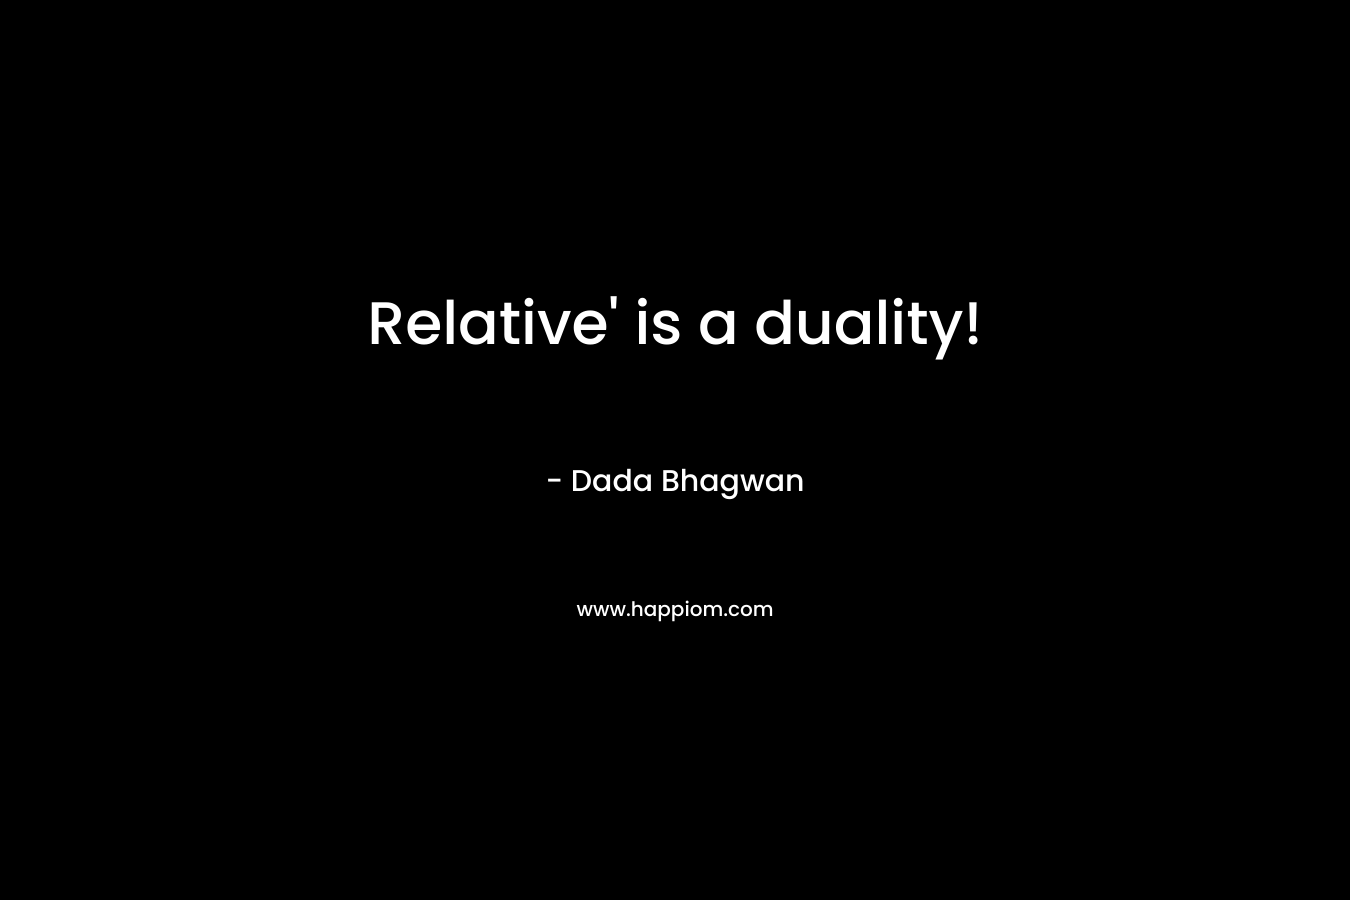 Relative' is a duality!